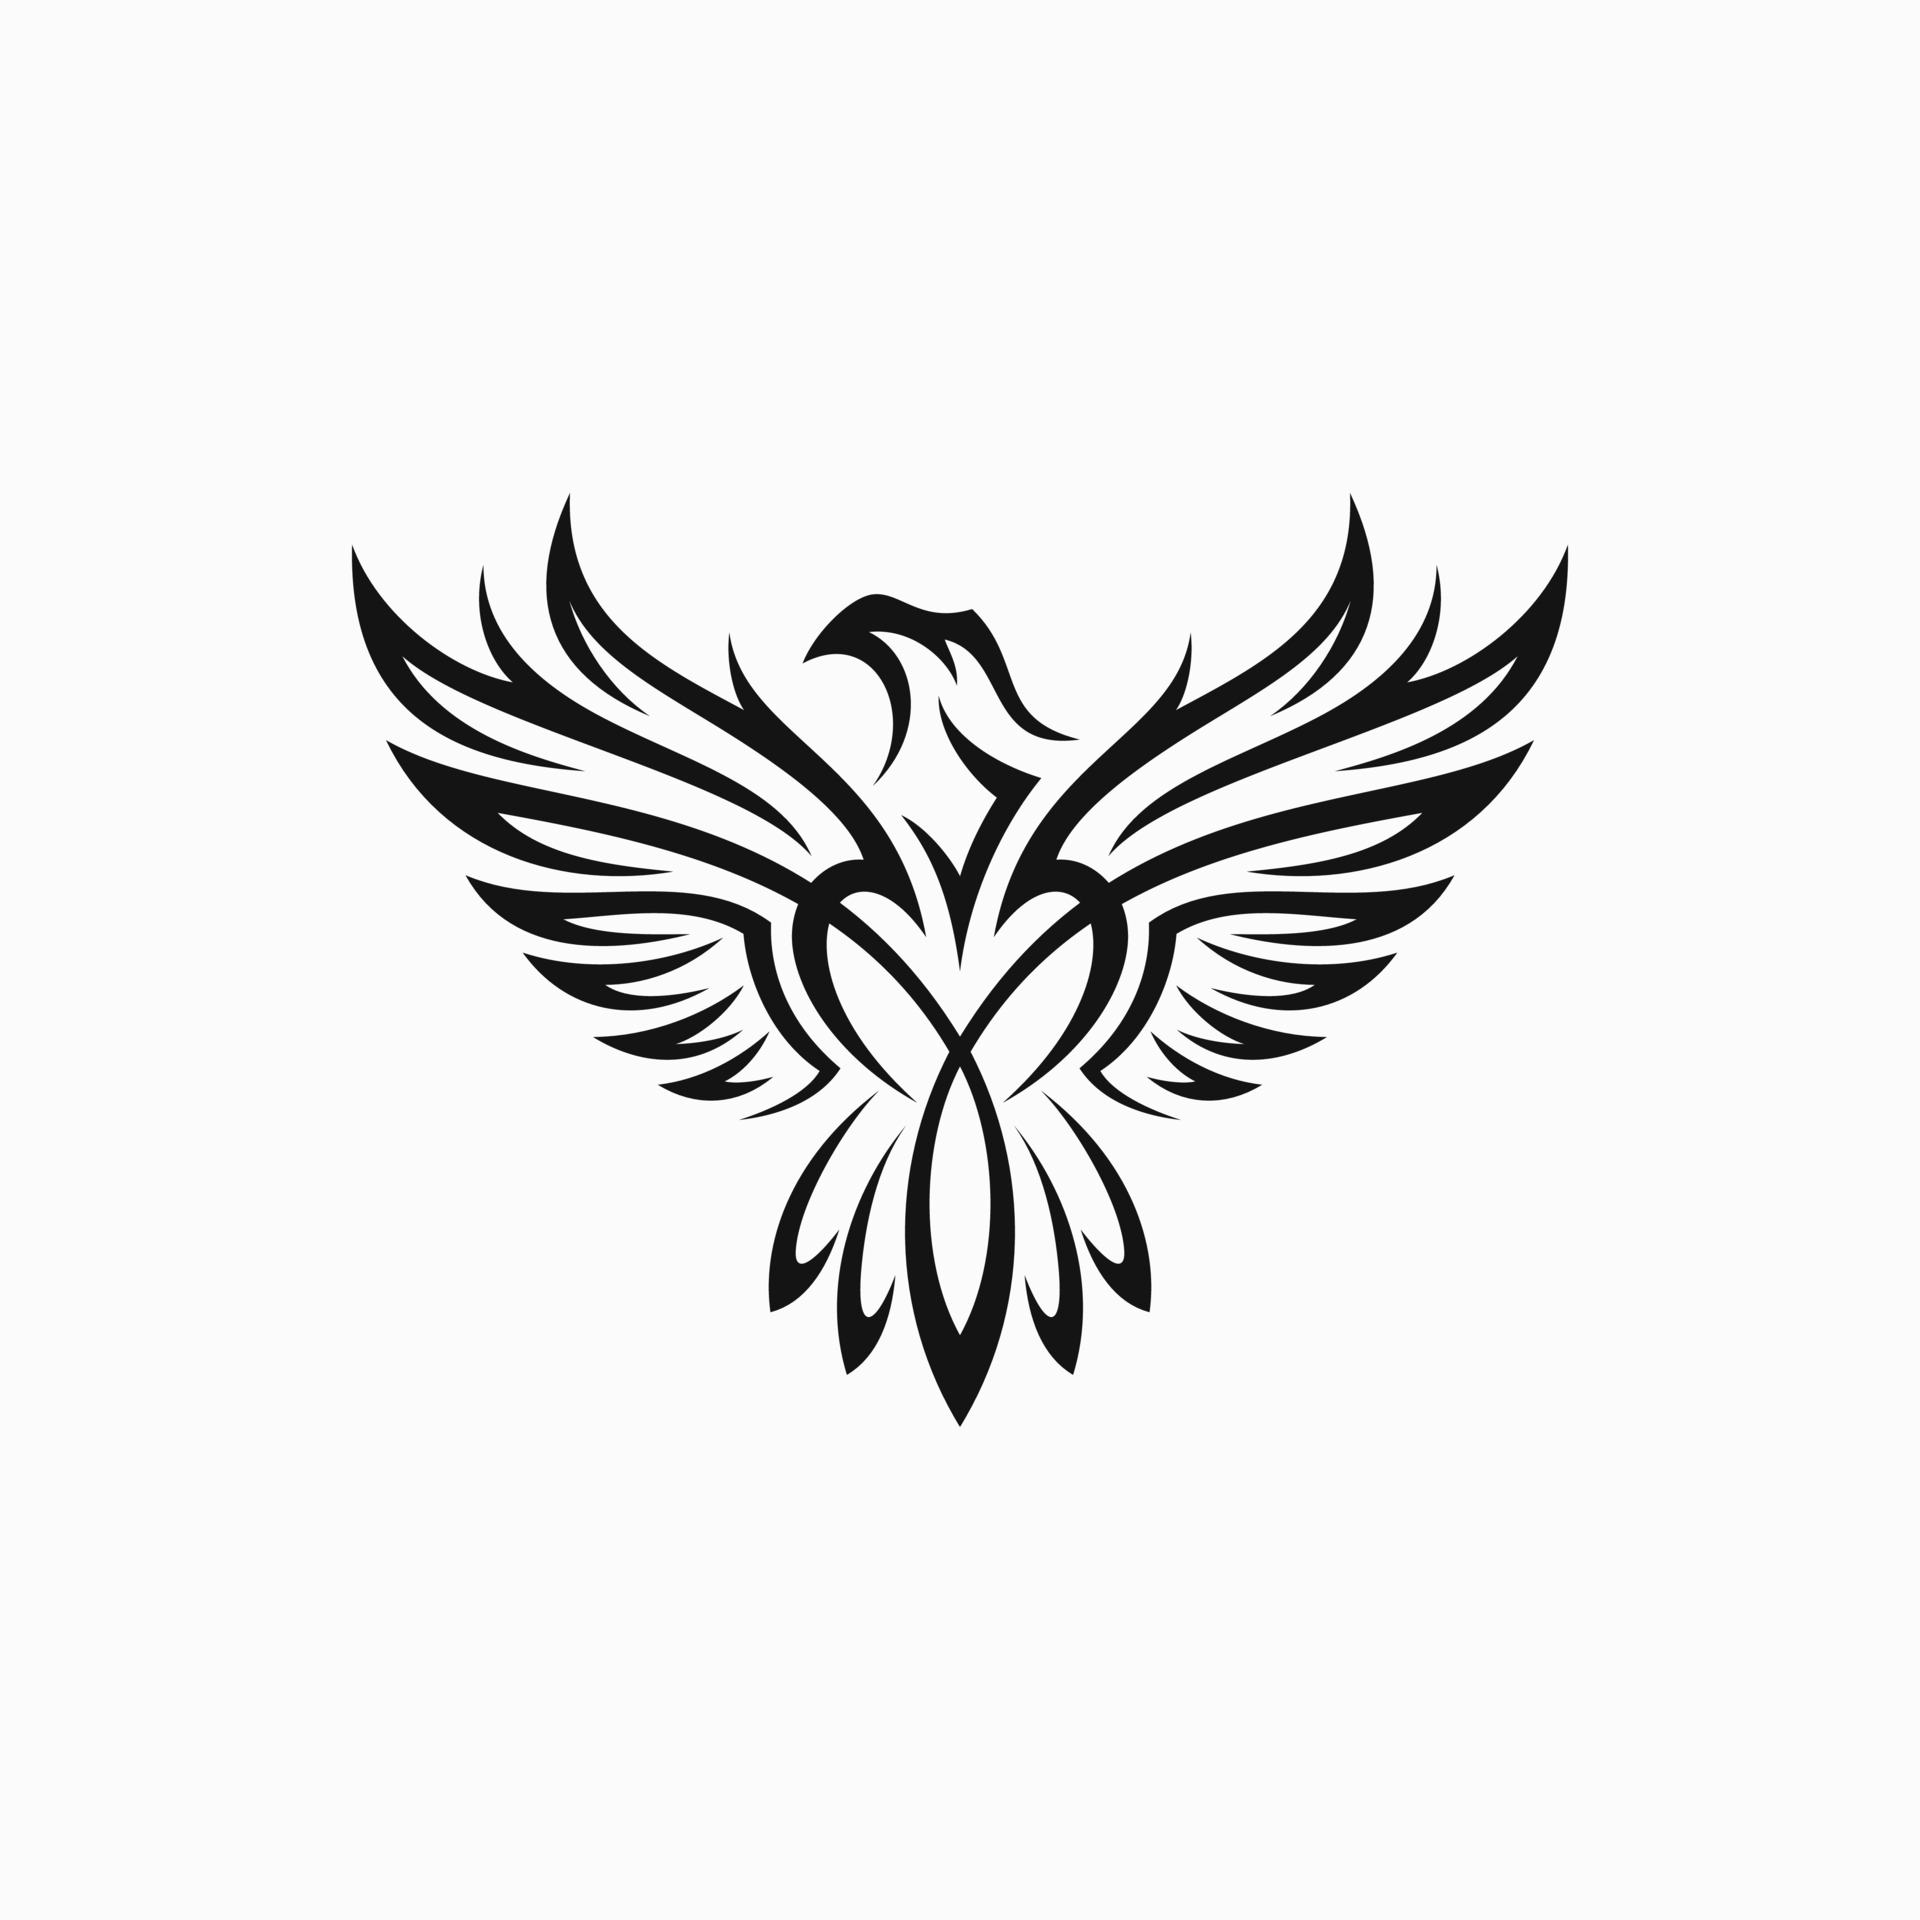 260 Silhouette Of A Tribal Eagle Tattoo Designs Illustrations  RoyaltyFree Vector Graphics  Clip Art  iStock